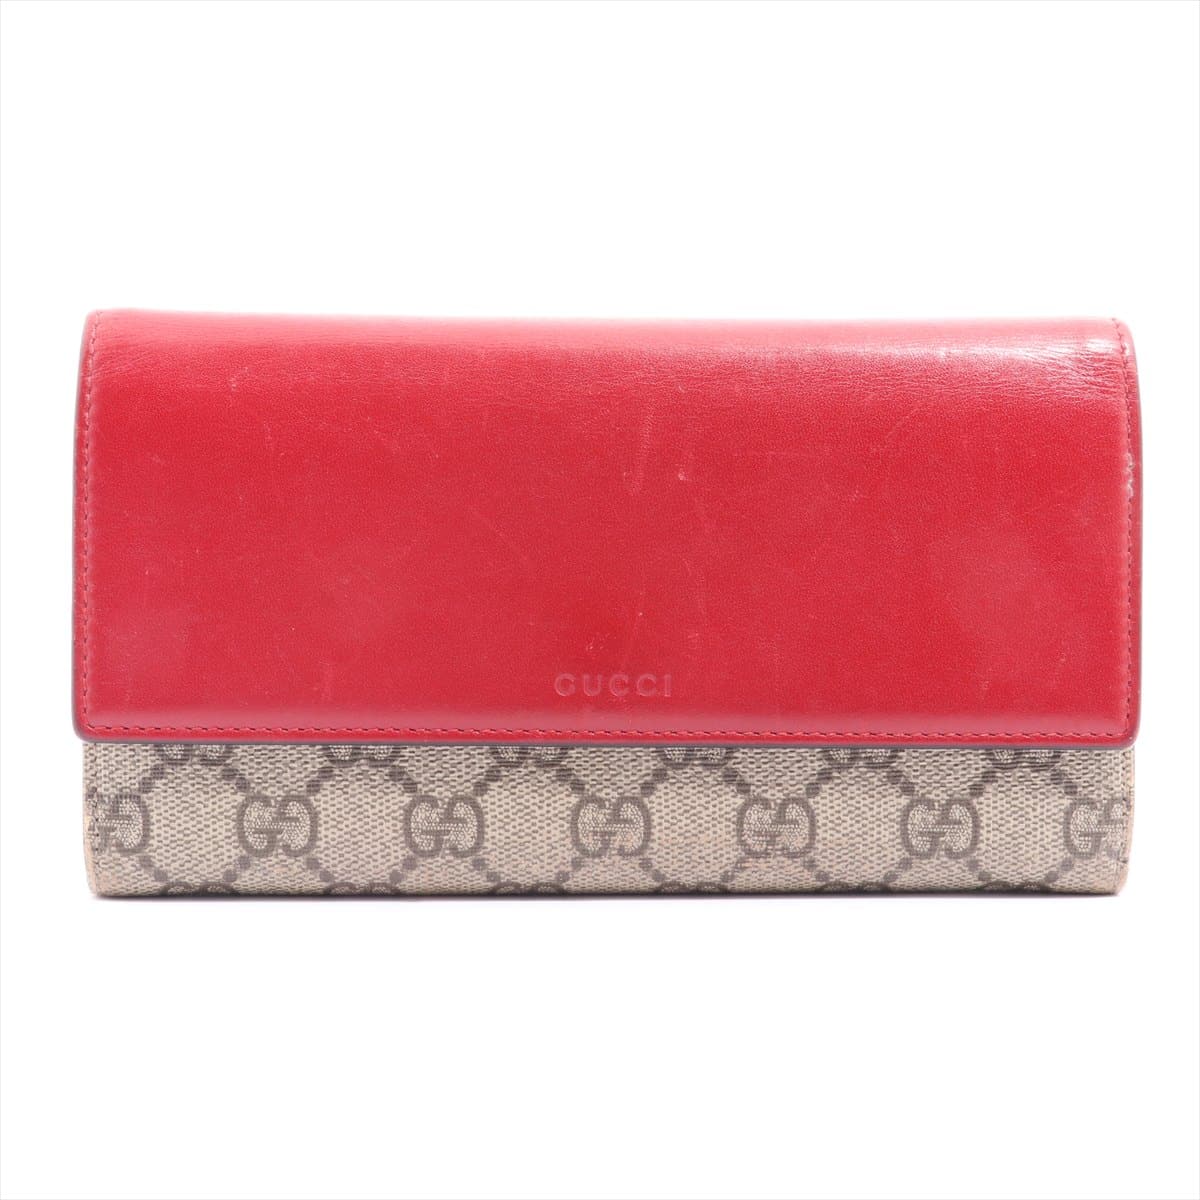 Gucci Guccissima 410100 PVC & leather Wallet Red